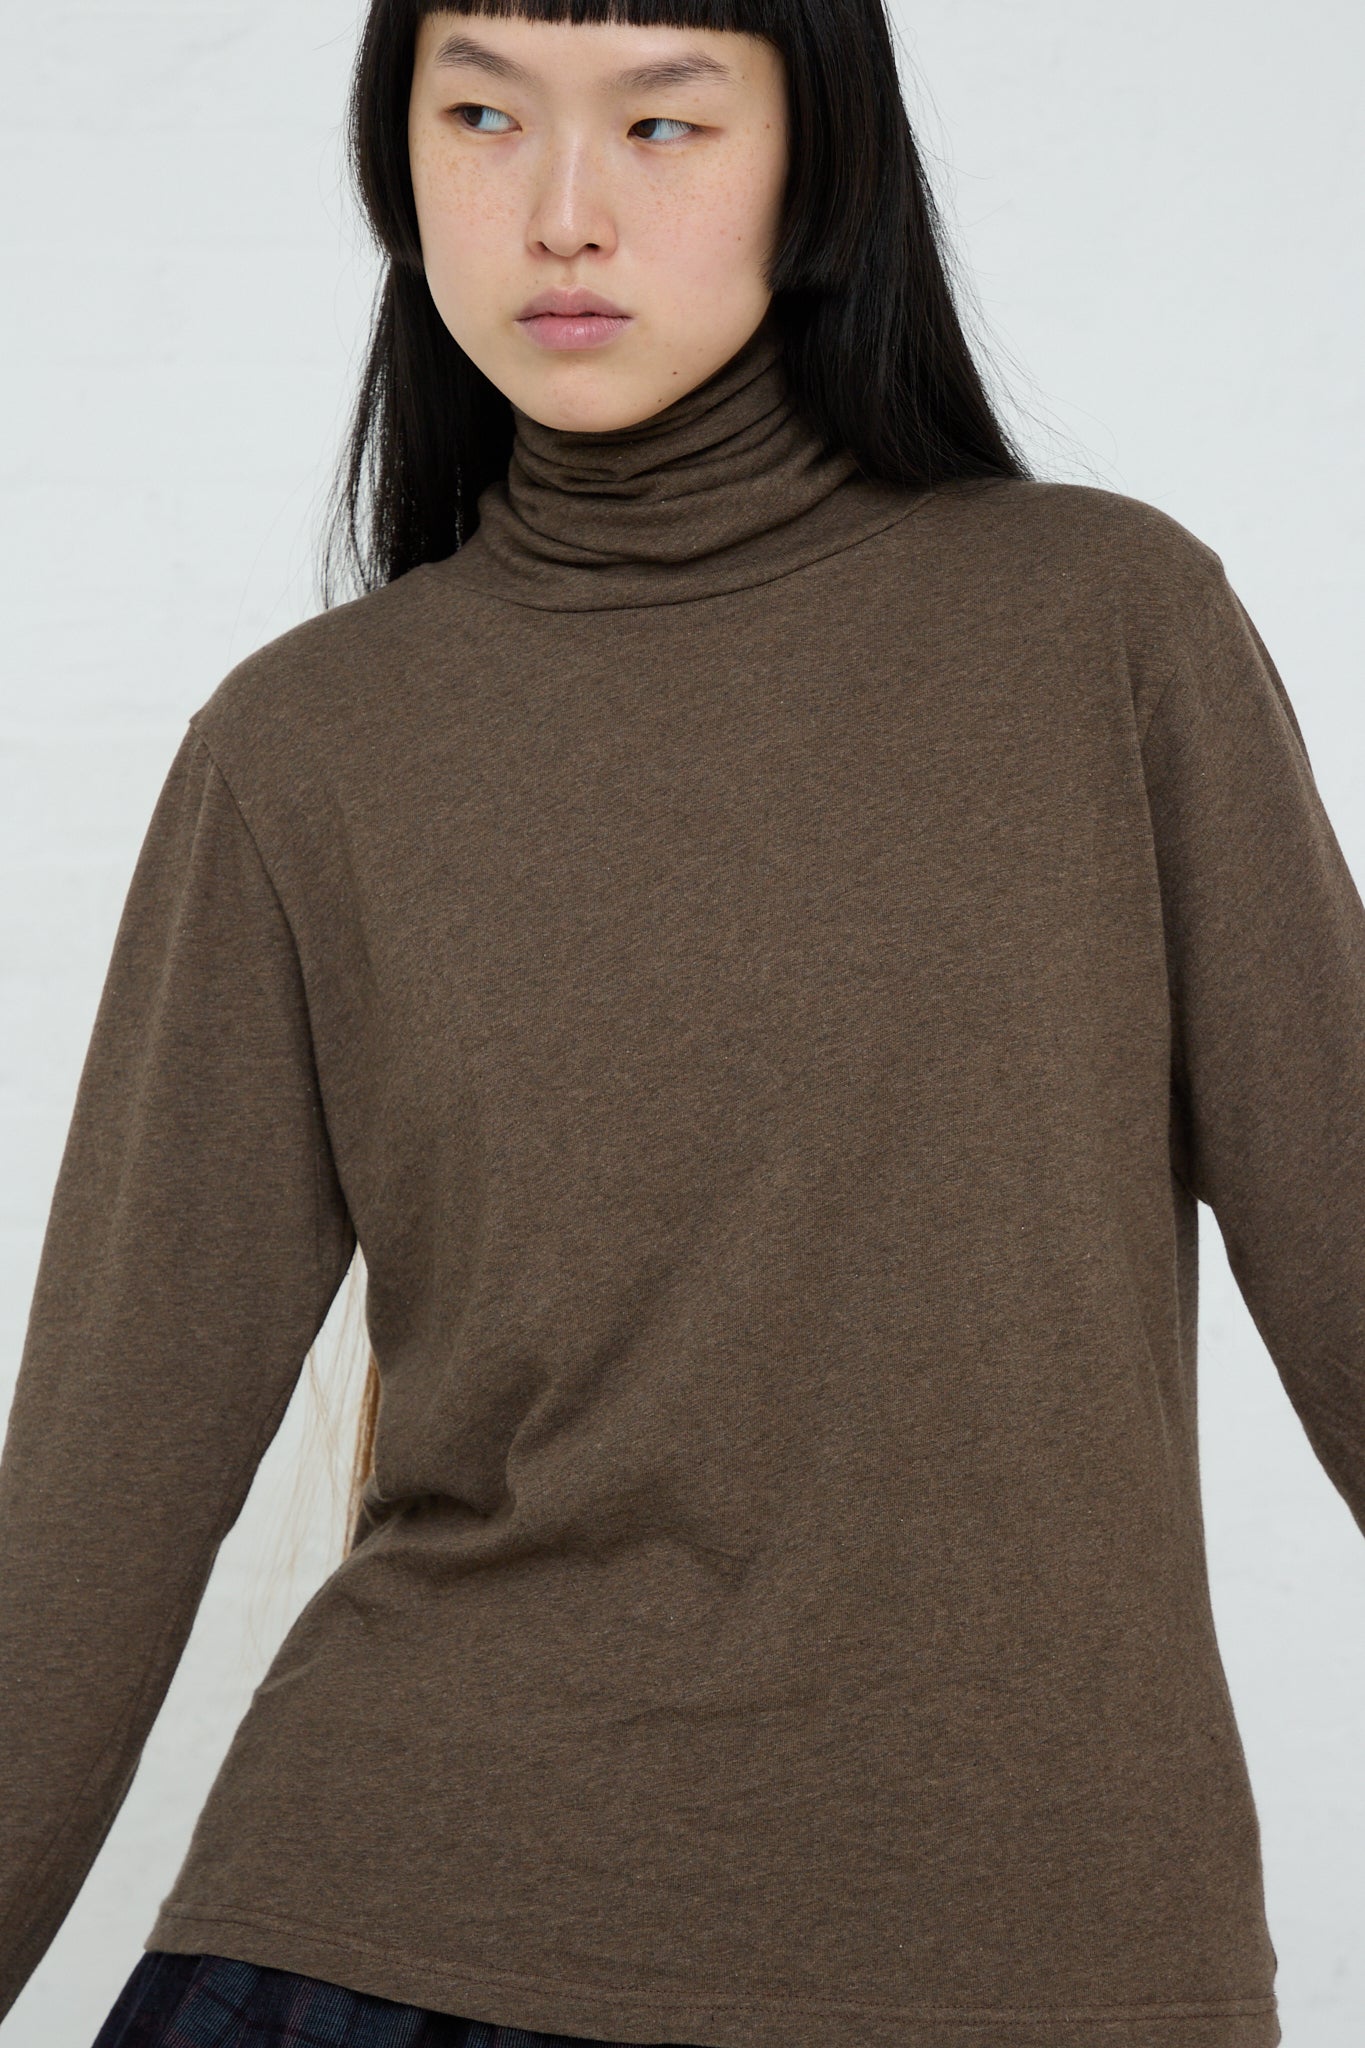 The model is wearing a relaxed fit, long sleeve brown turtleneck, made of Ichi's Cotton Knit Turtleneck in Mocha.